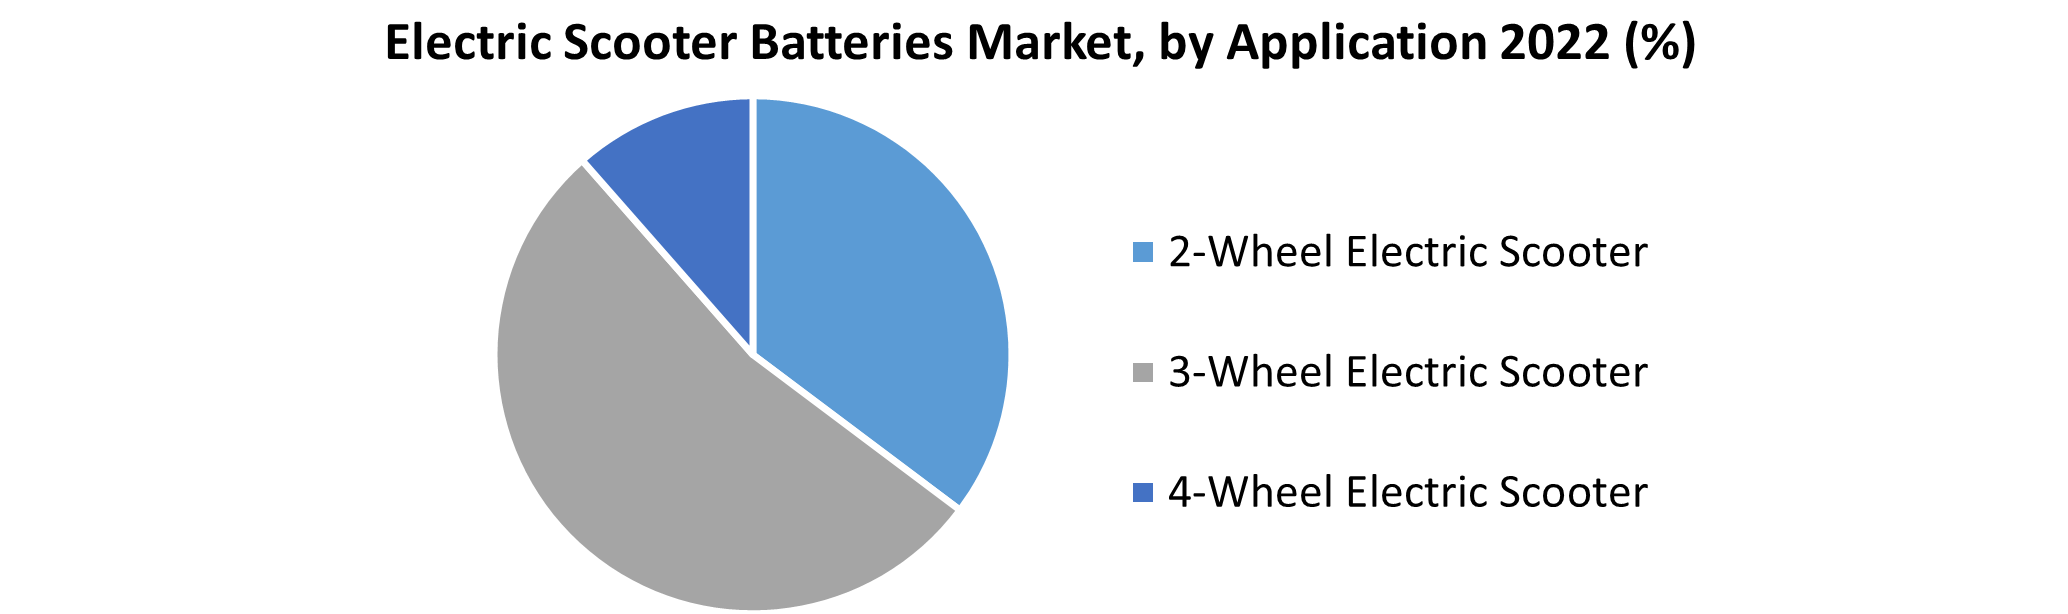 Electric Scooter Batteries Market